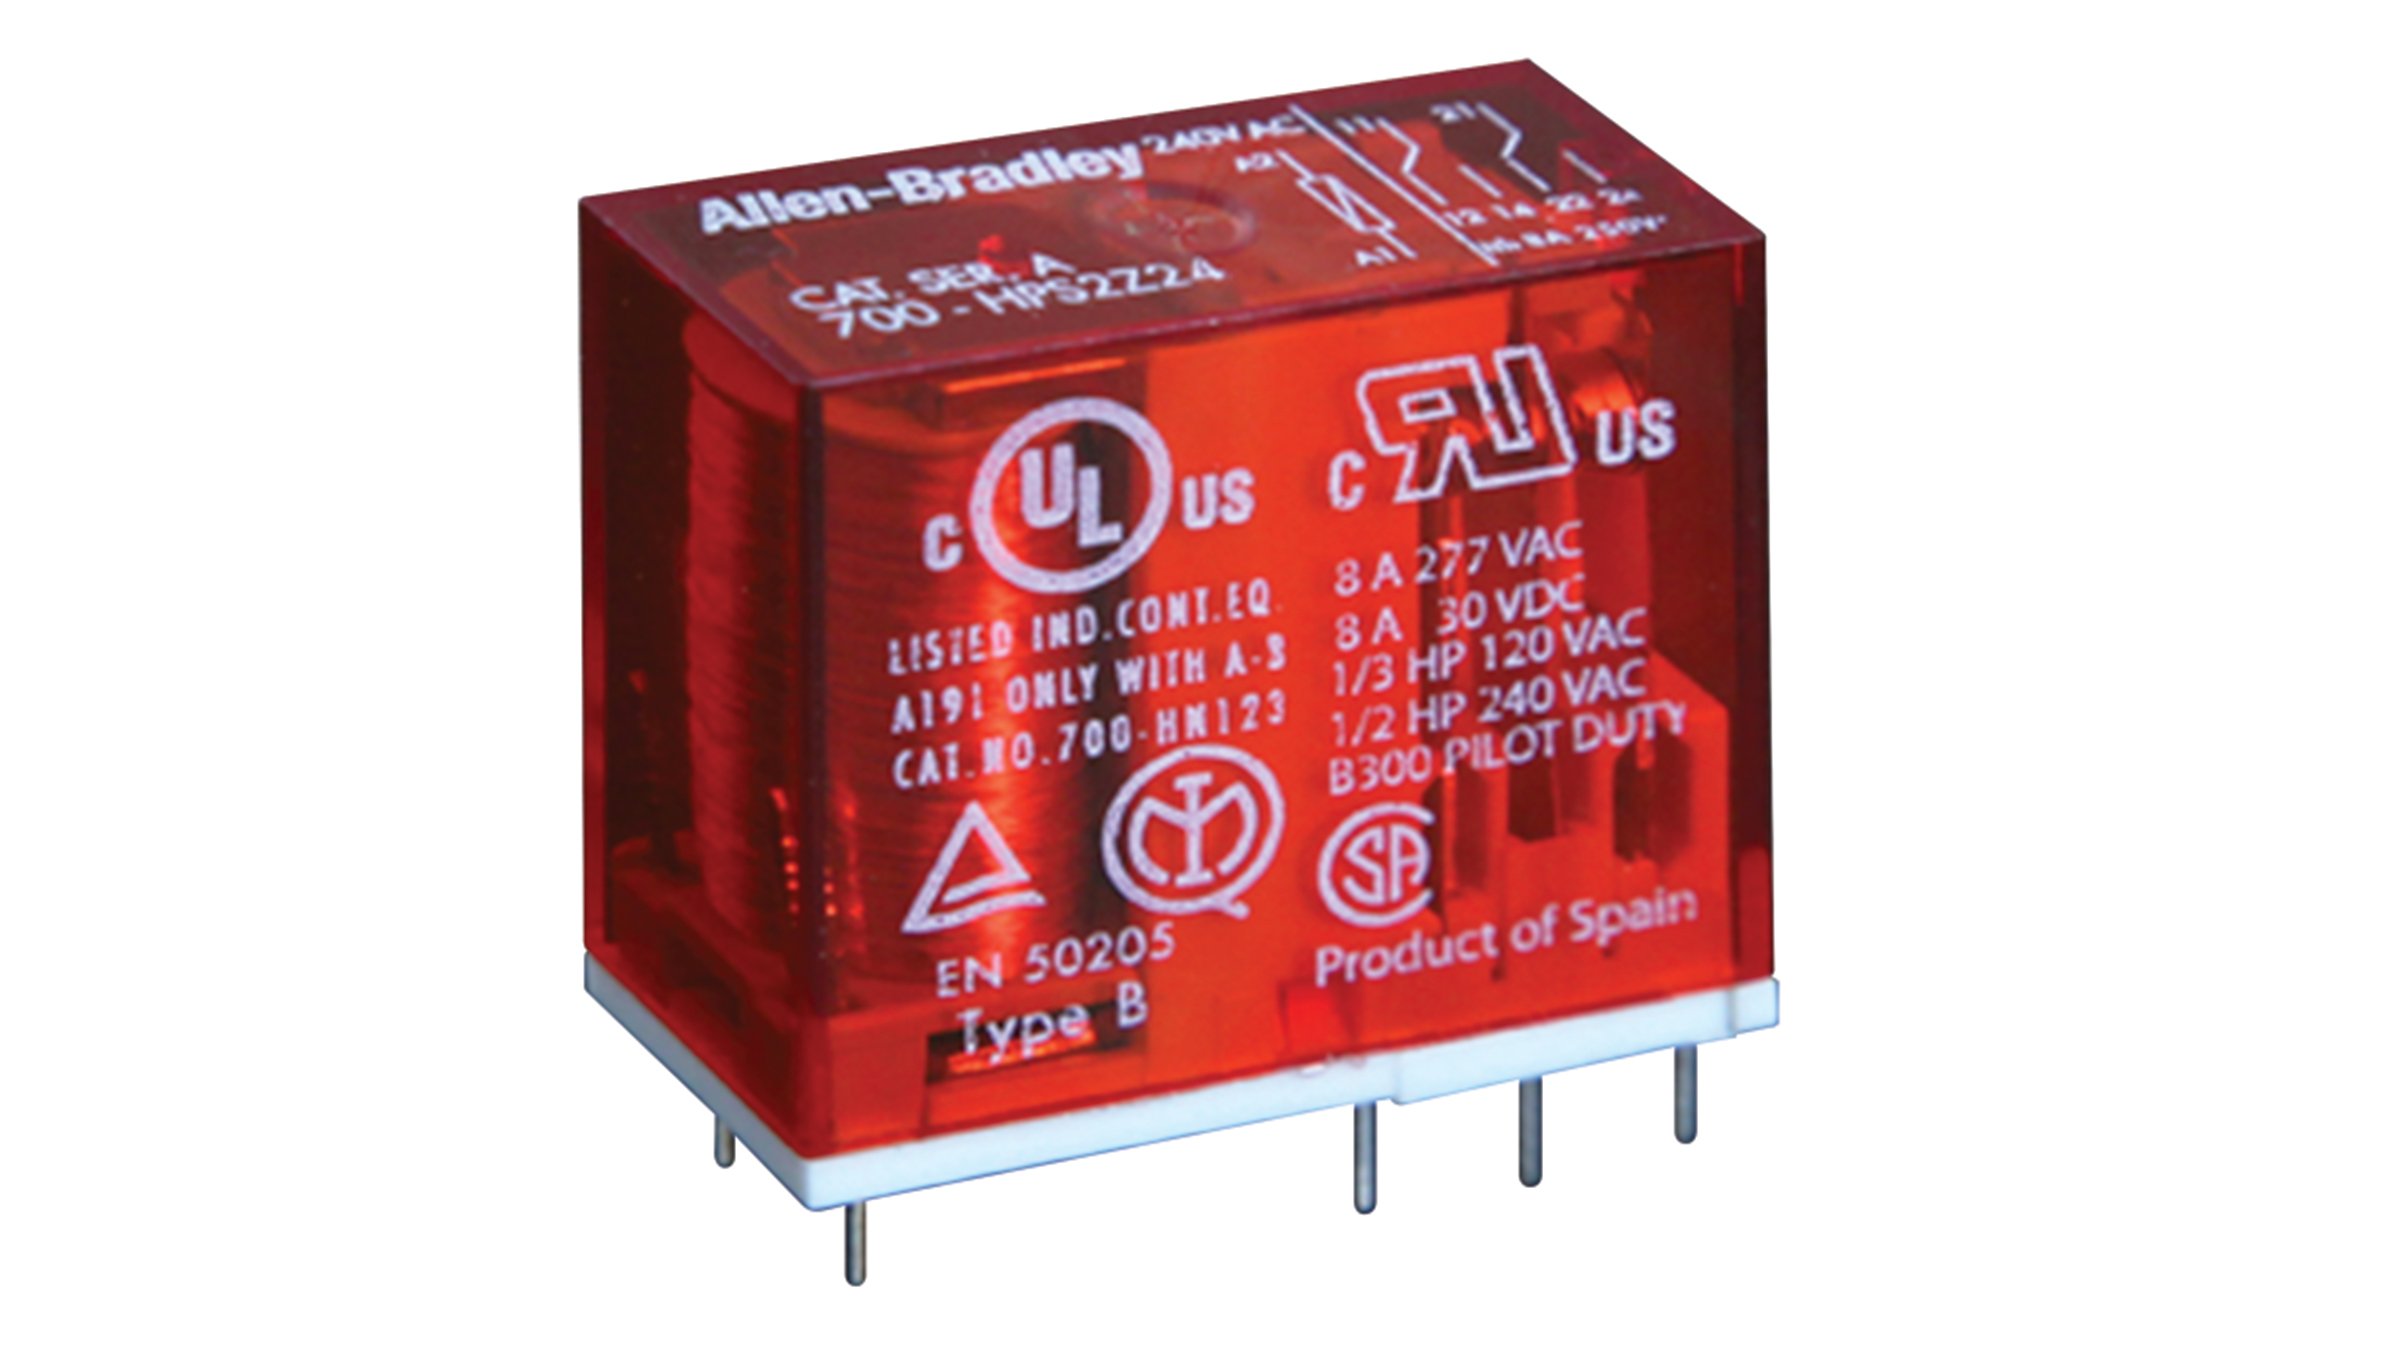 Allen-Bradley Bulletin 700-HPS PCB Pin Style Safety Control Relays feature red cover with 8 pins mechanically linked contacts that are required for safety circuits